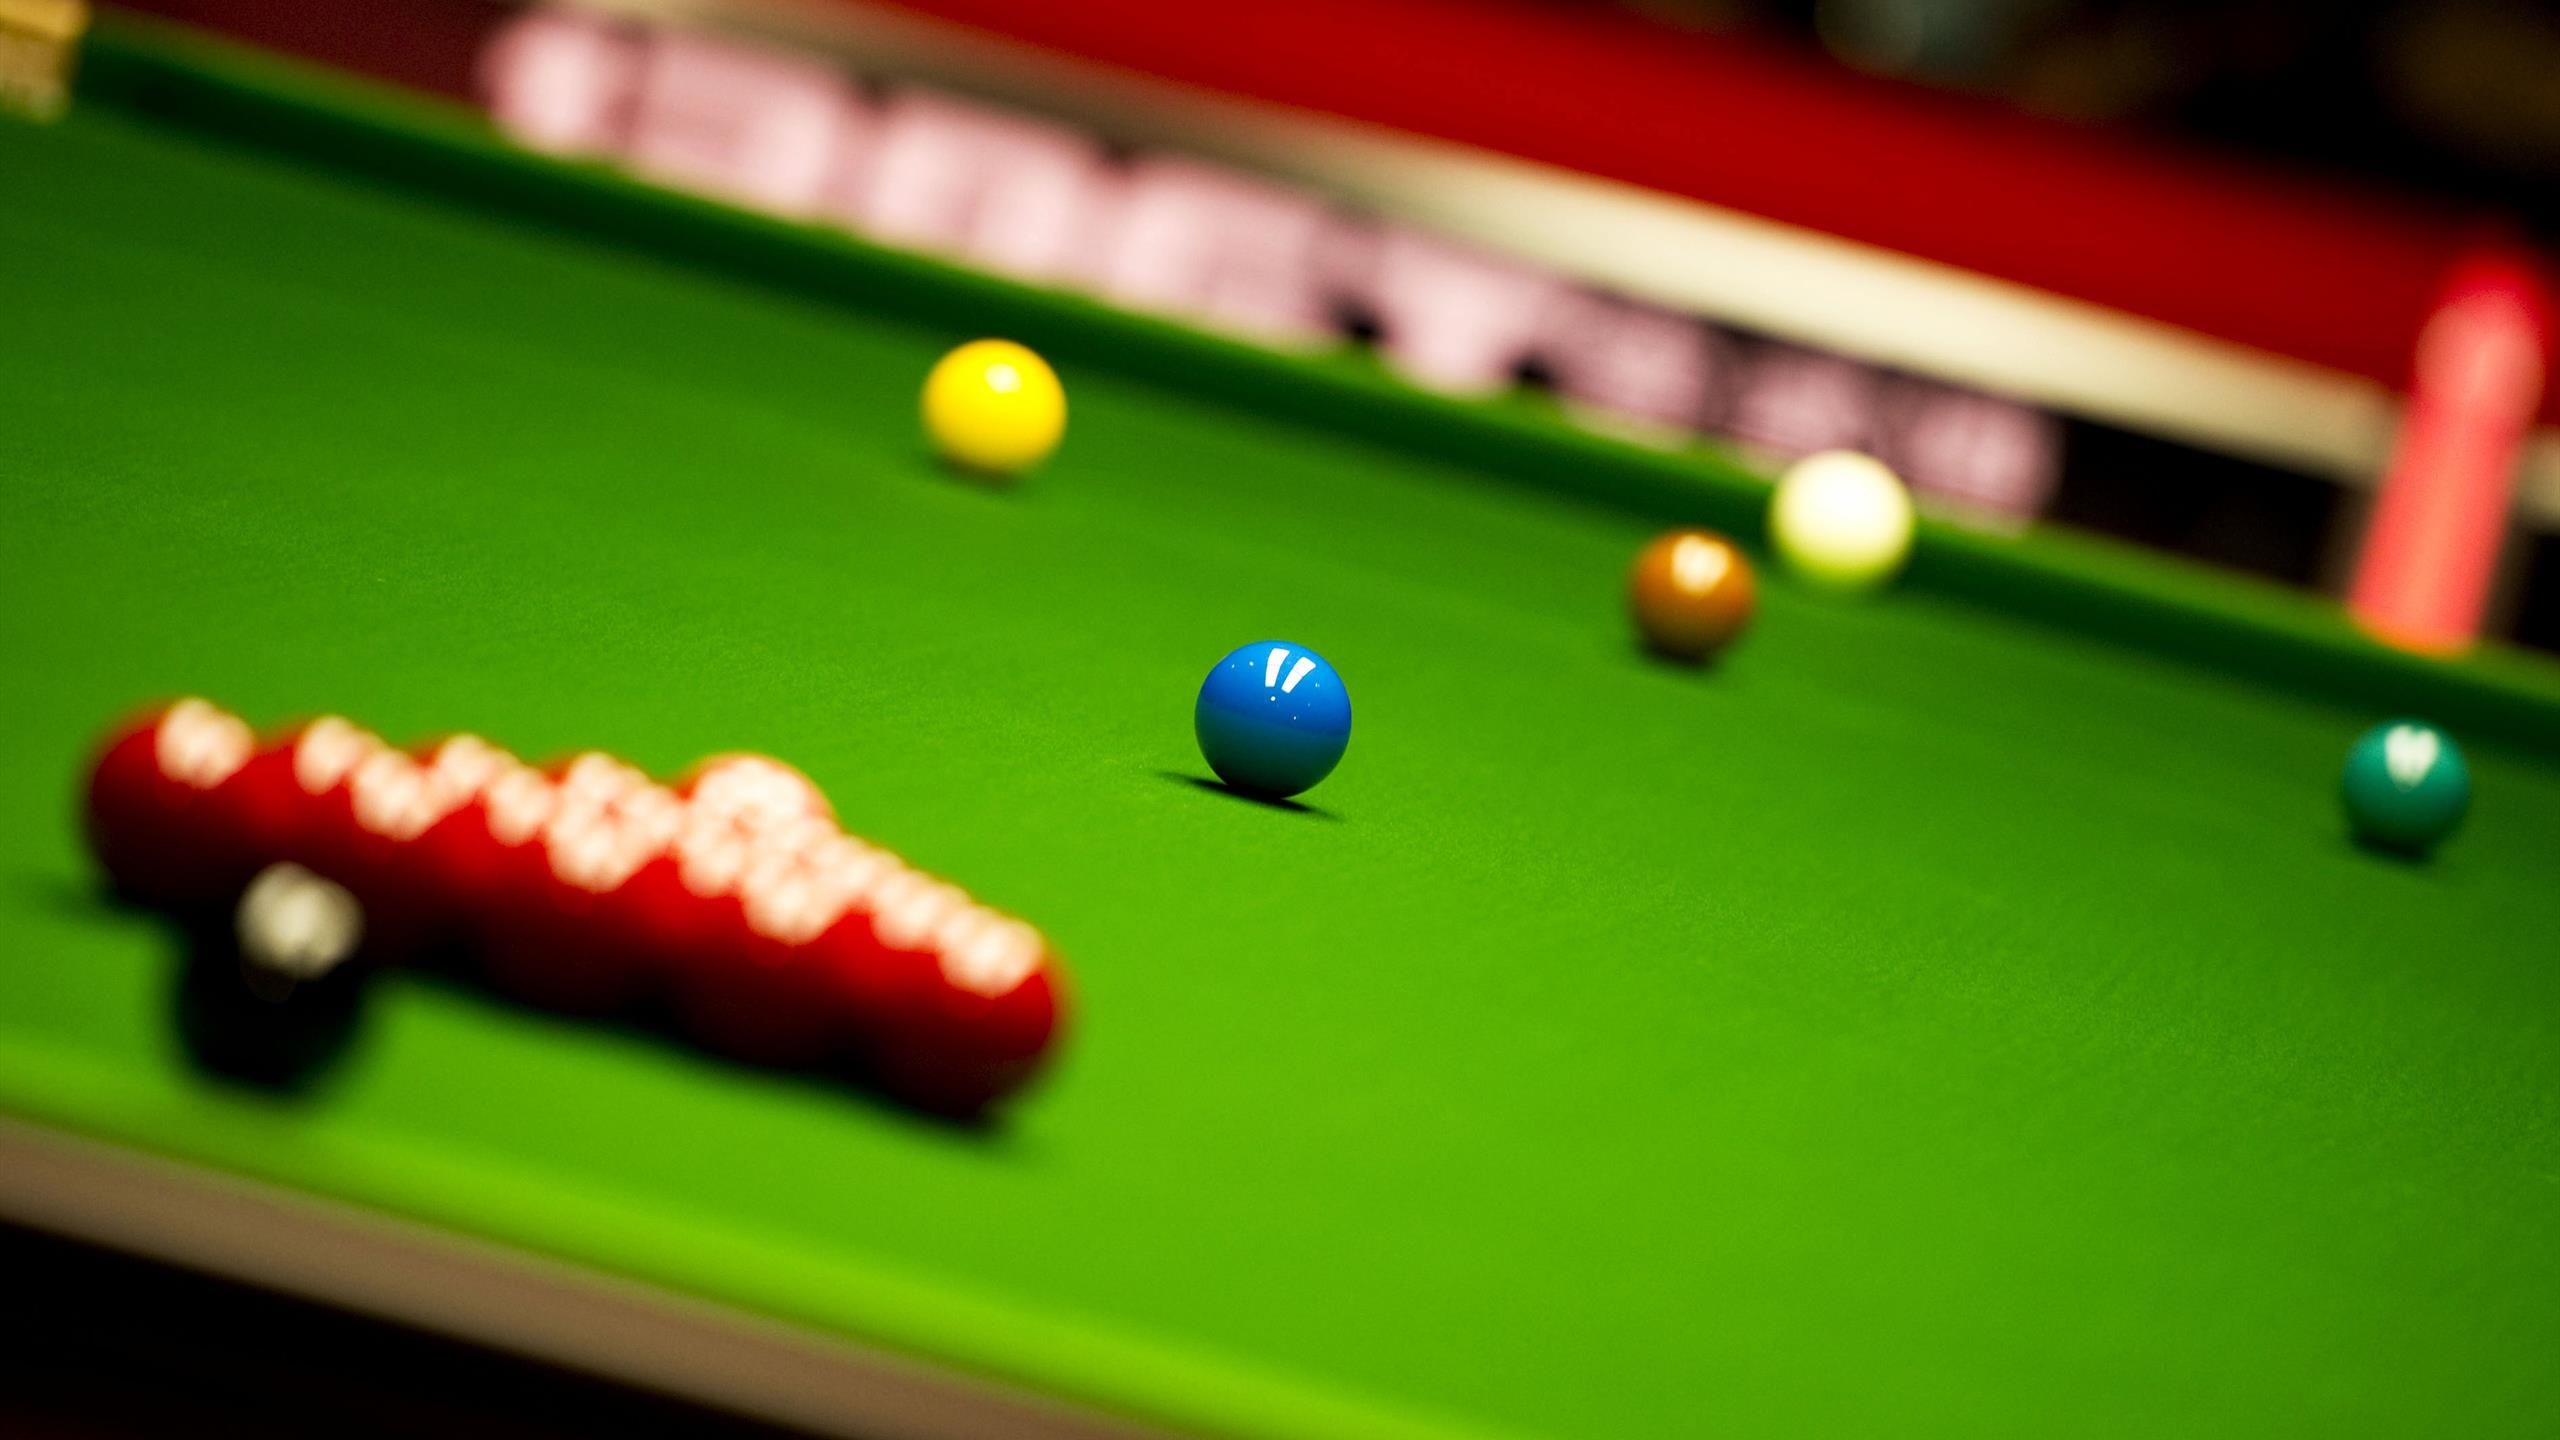 Lengthy bans expected in snooker match-fixing probe led by WPBSA with sanctions imminent